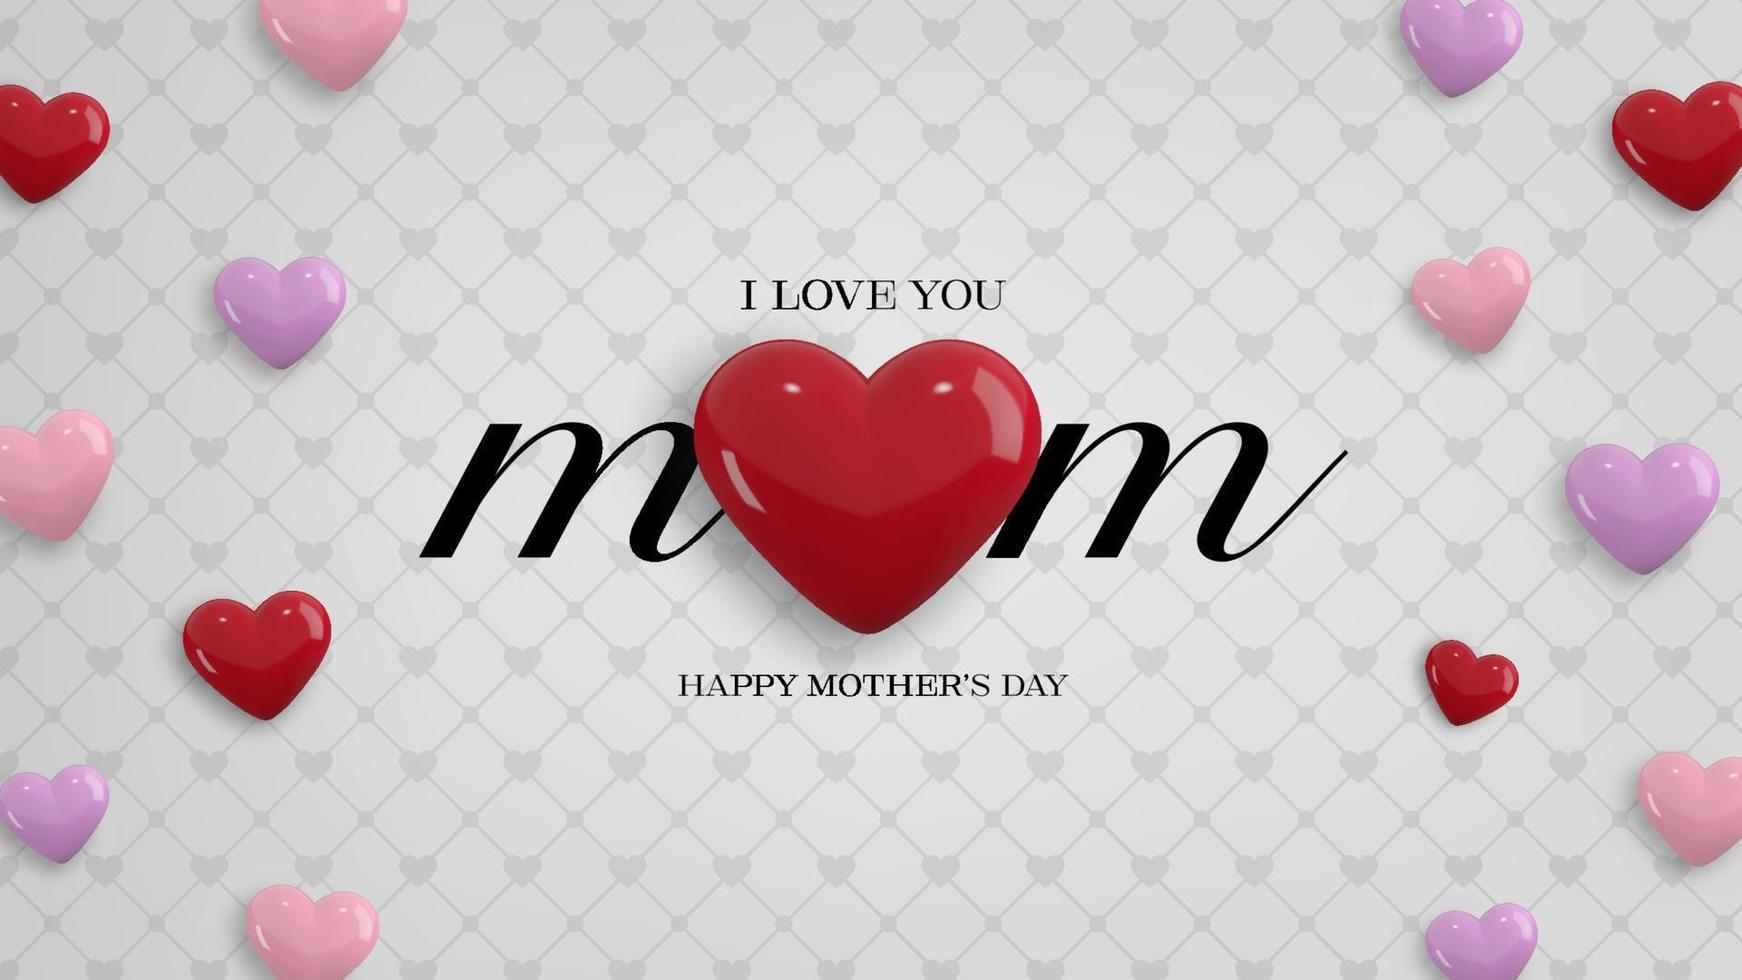 mother's day banner with colorful hearts vector